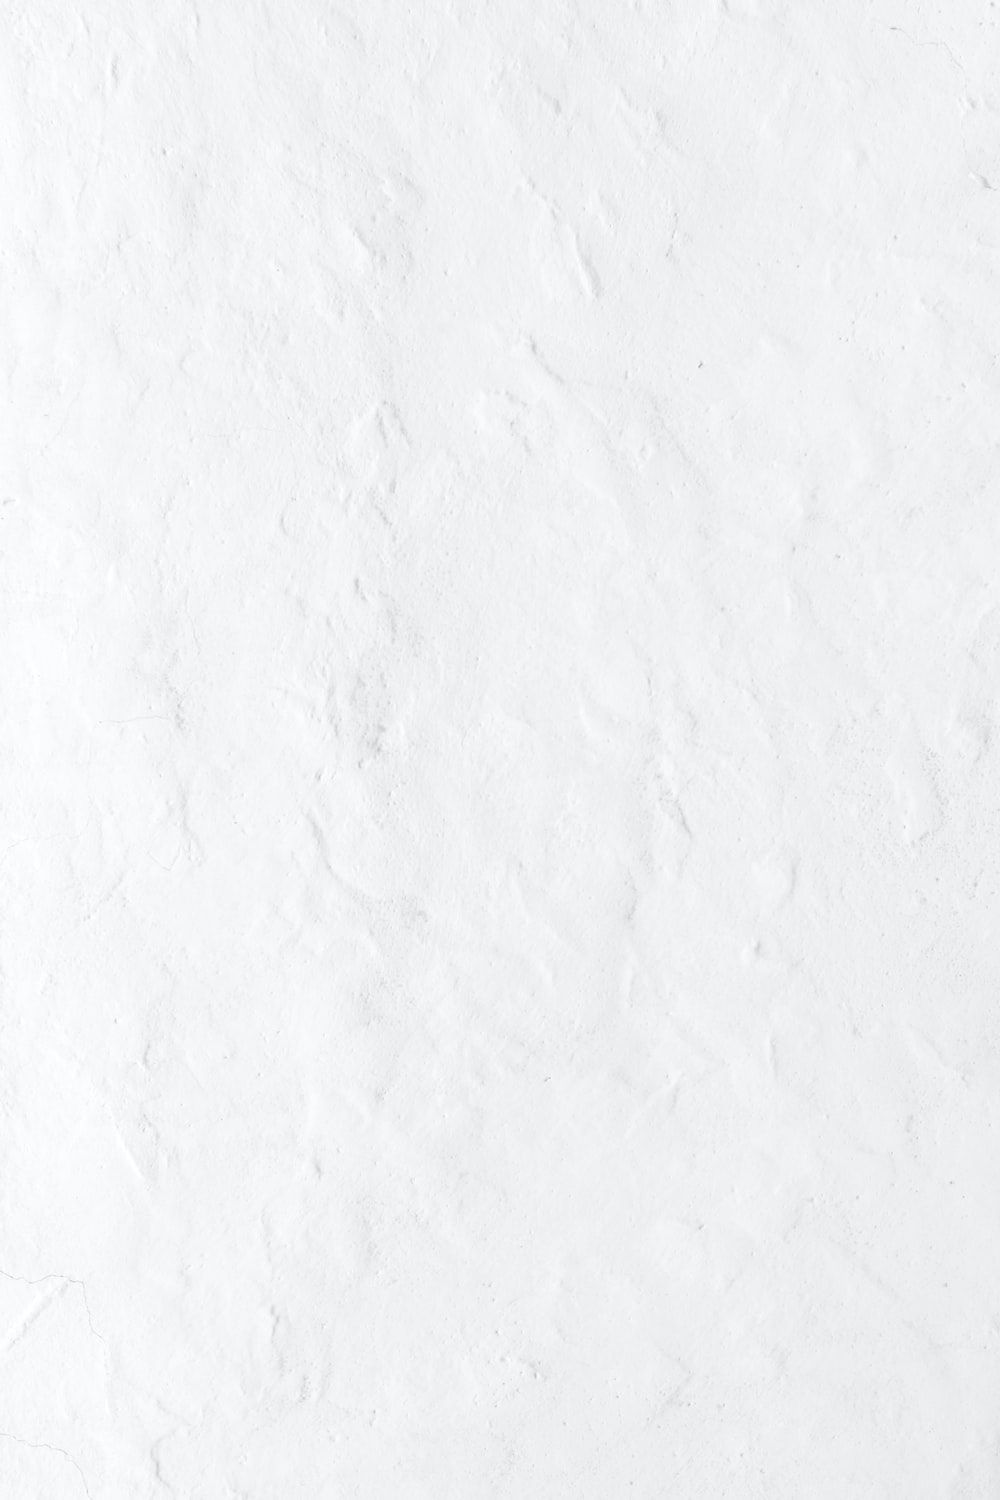 White Wall Picture HD .com